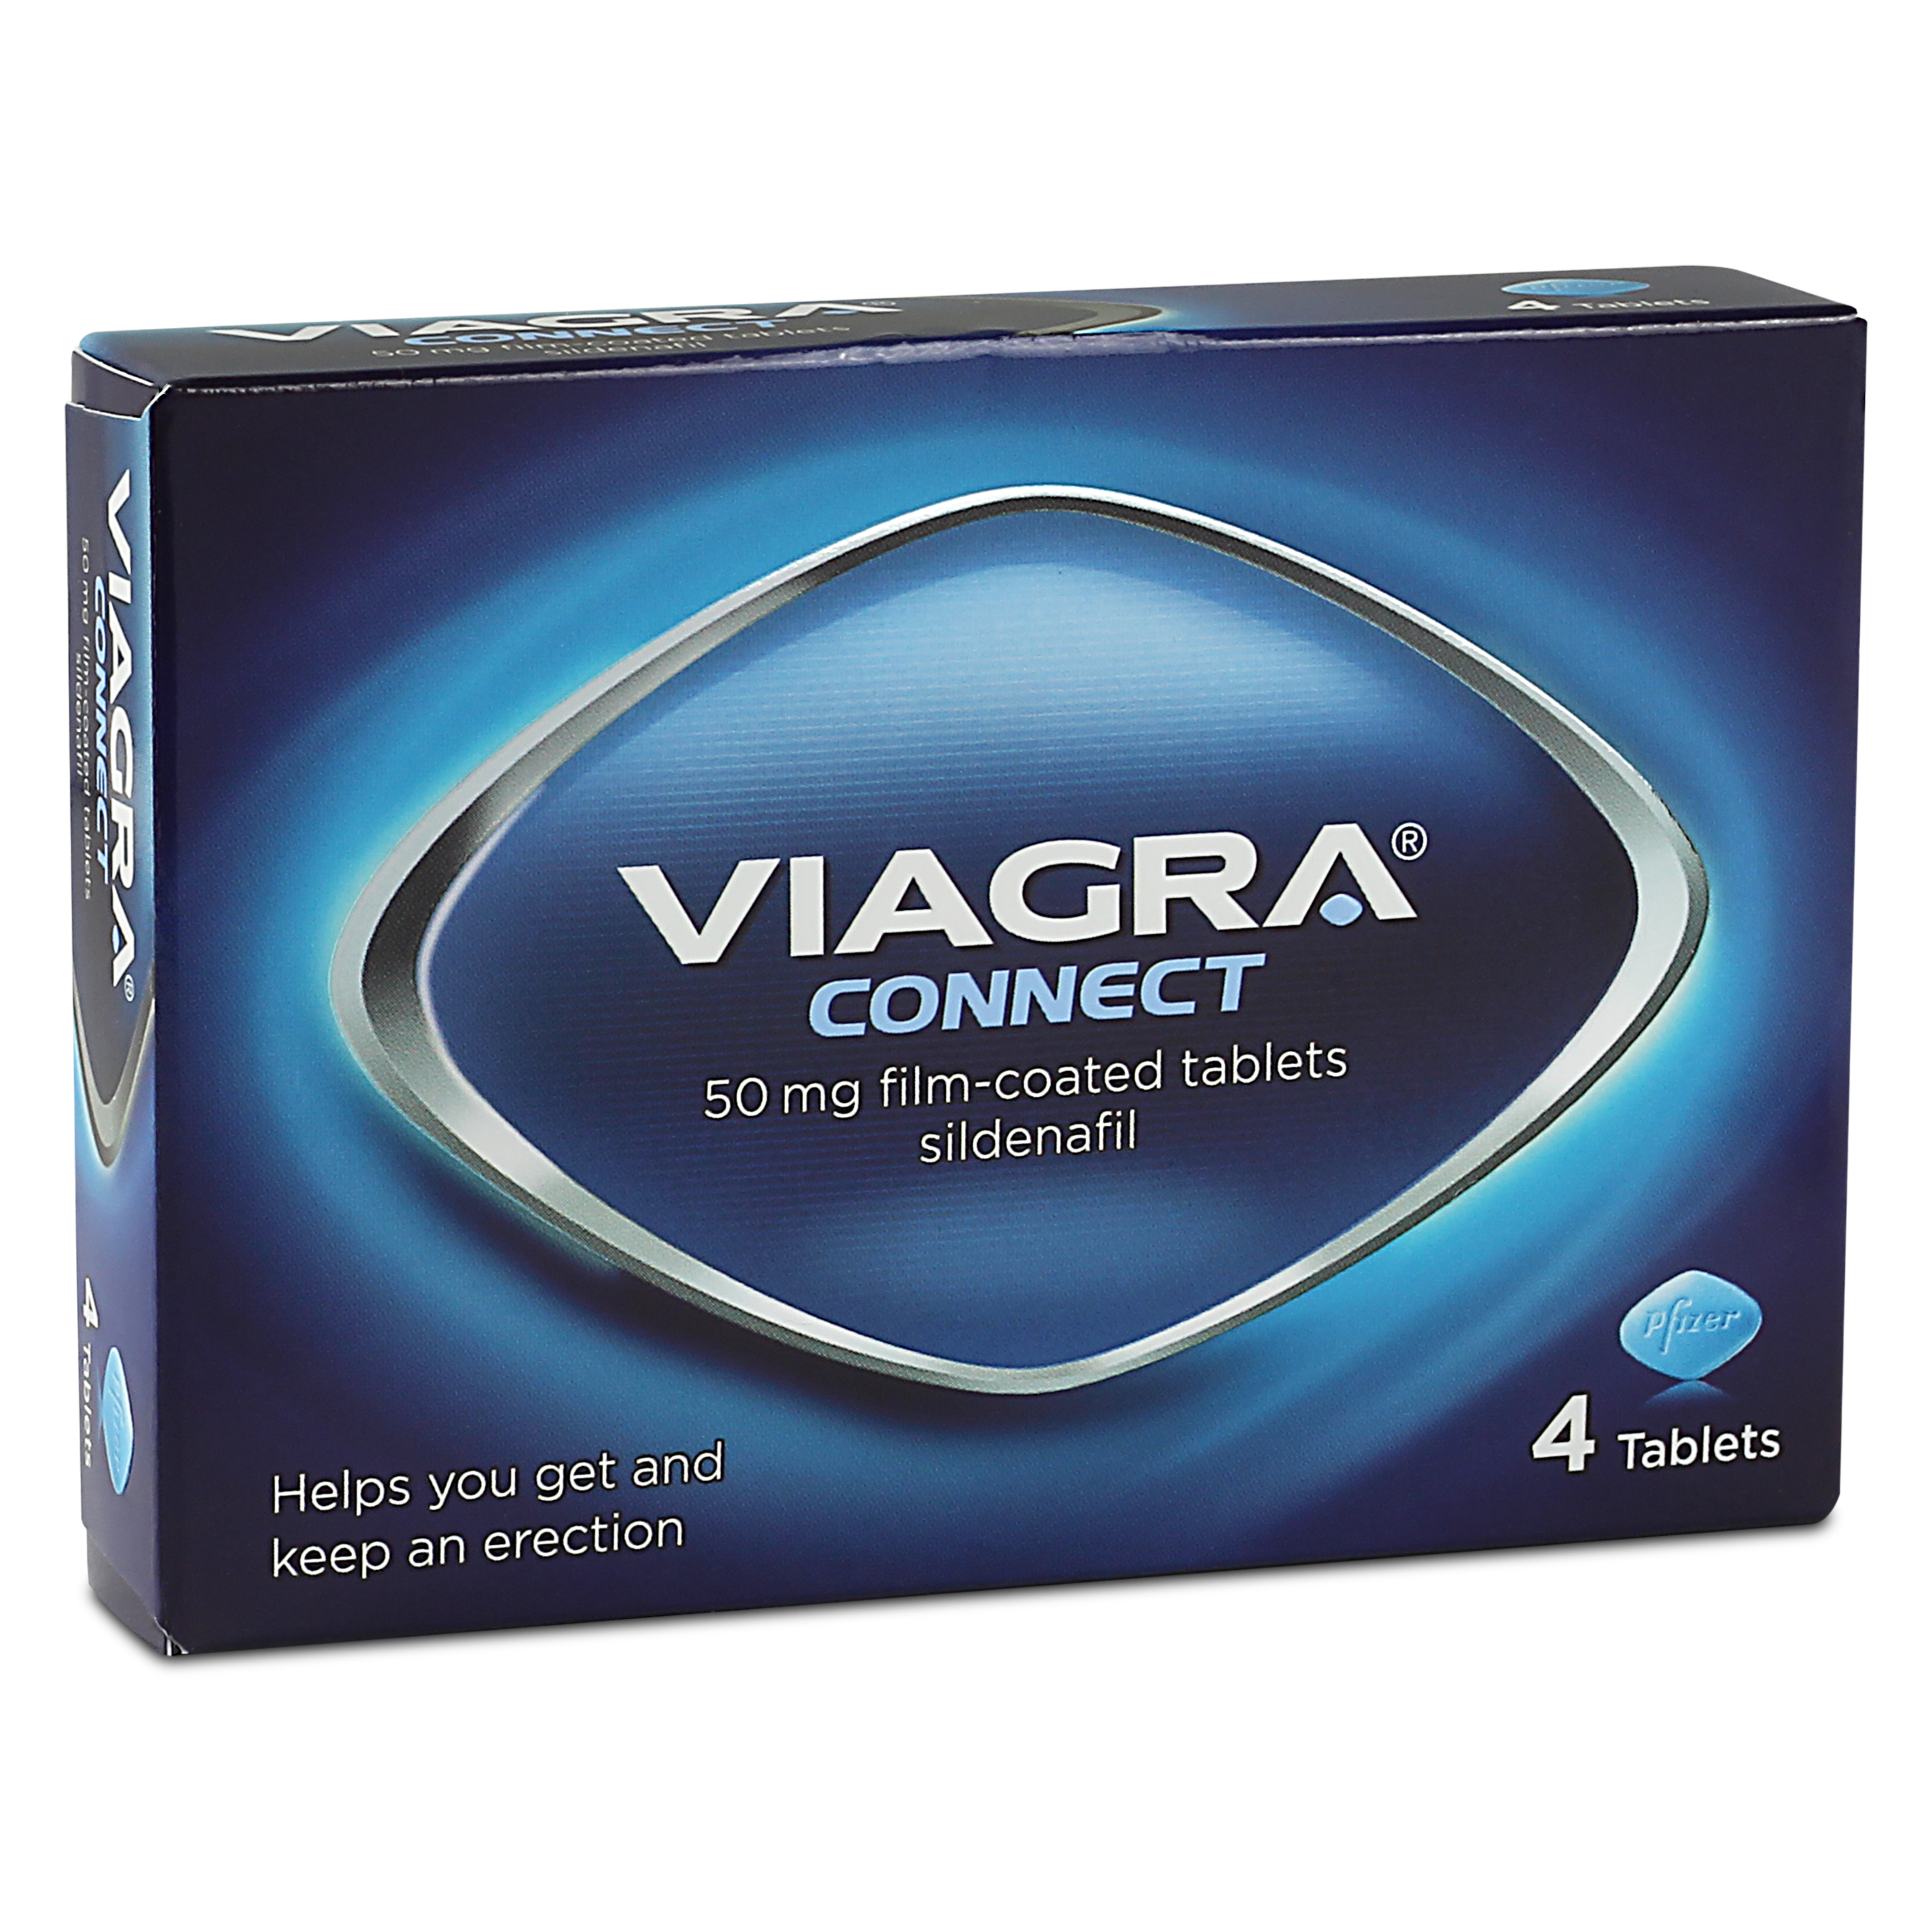 Viagra Connect 50MG Tablets for Sale UK